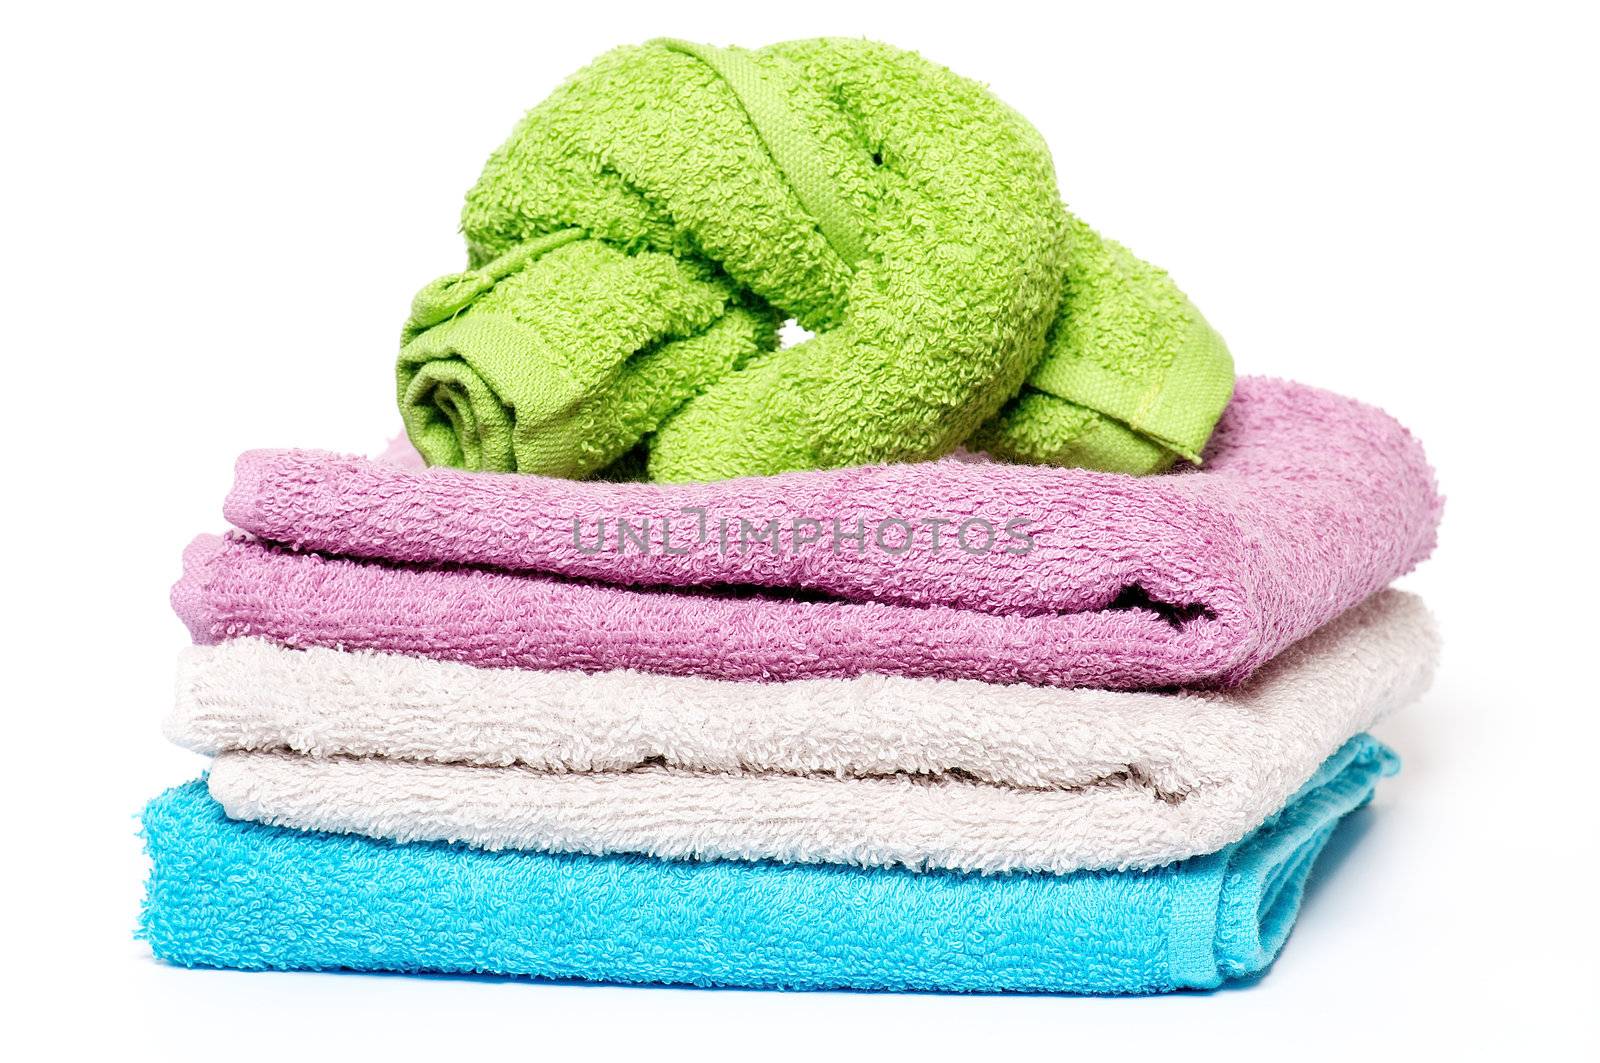 Multi-colored Terry towels isolated on white background